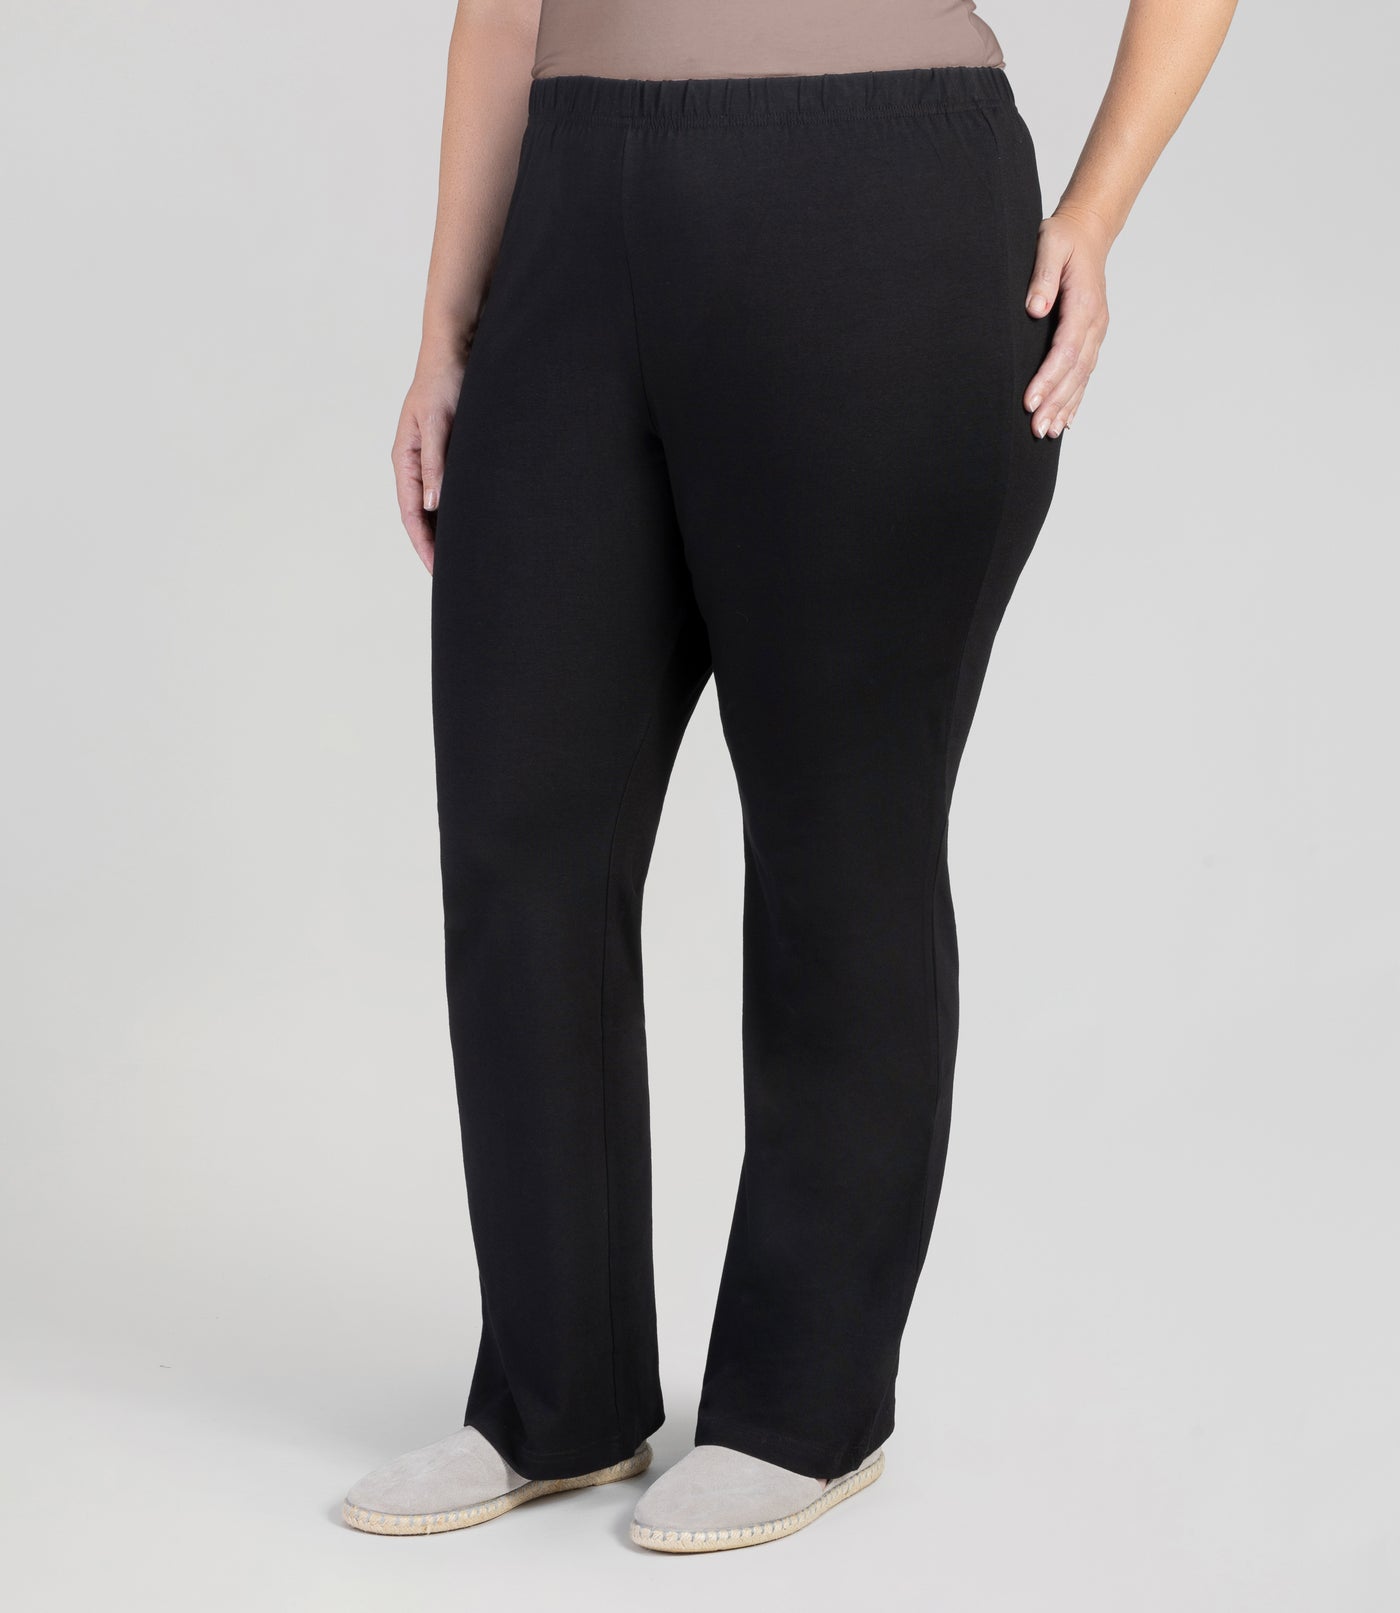 Front view, bottom half of plus sized woman, wearing JunoActives Stretch Naturals loosest bootcut leggings and are full length with an elastic waist band in black.